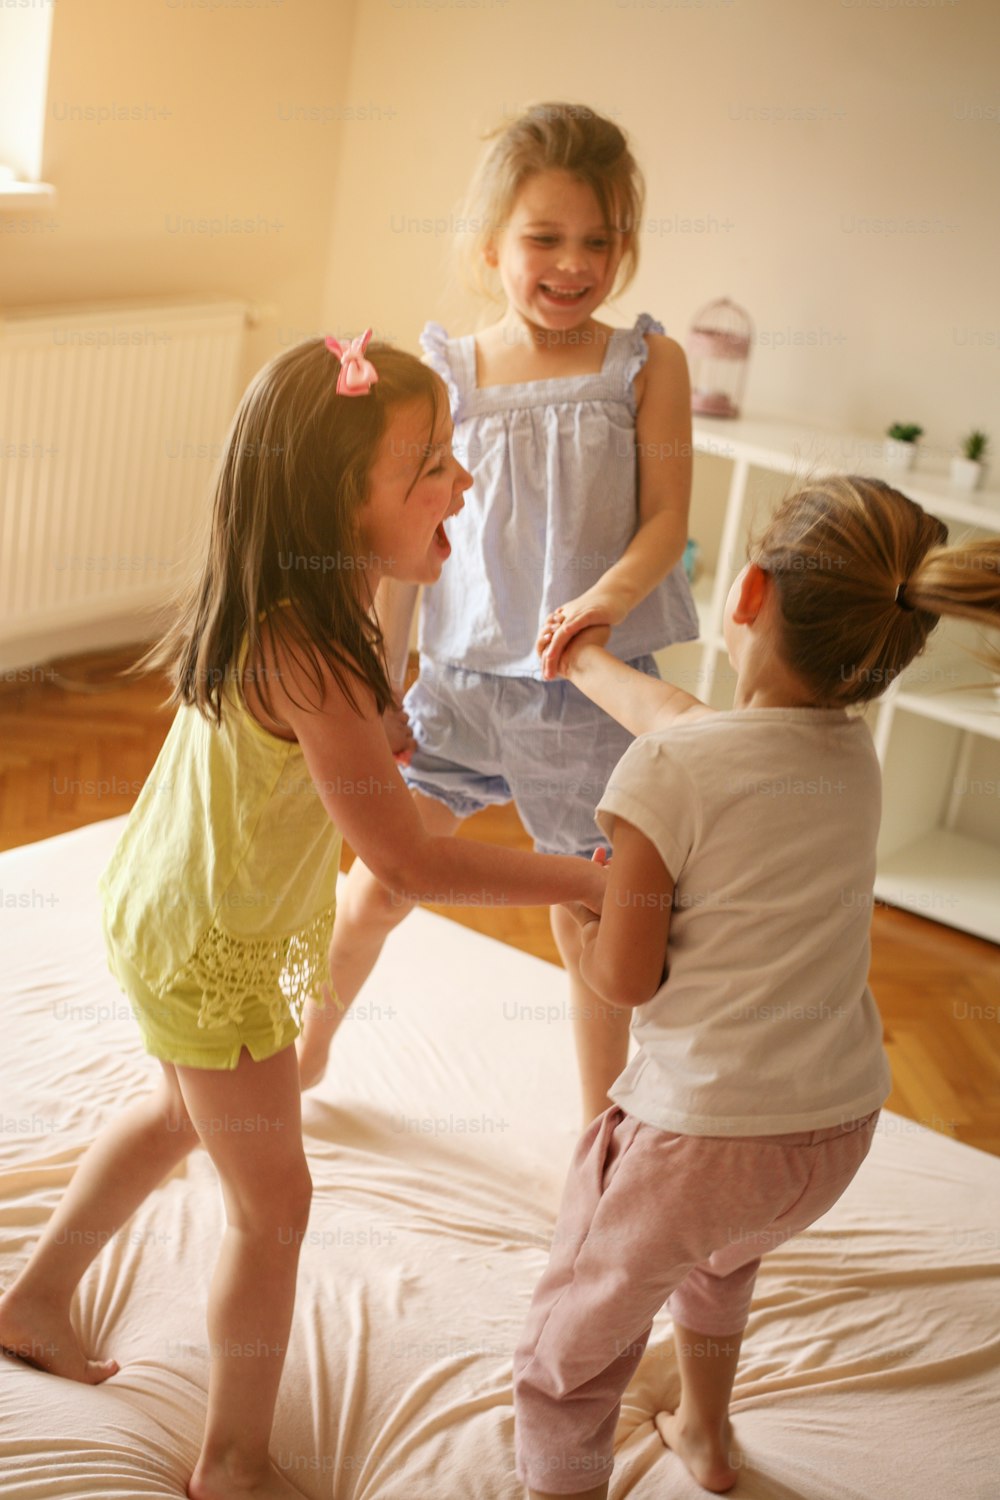 Little girls having fun together in bed. Little girls playing at home on bed.